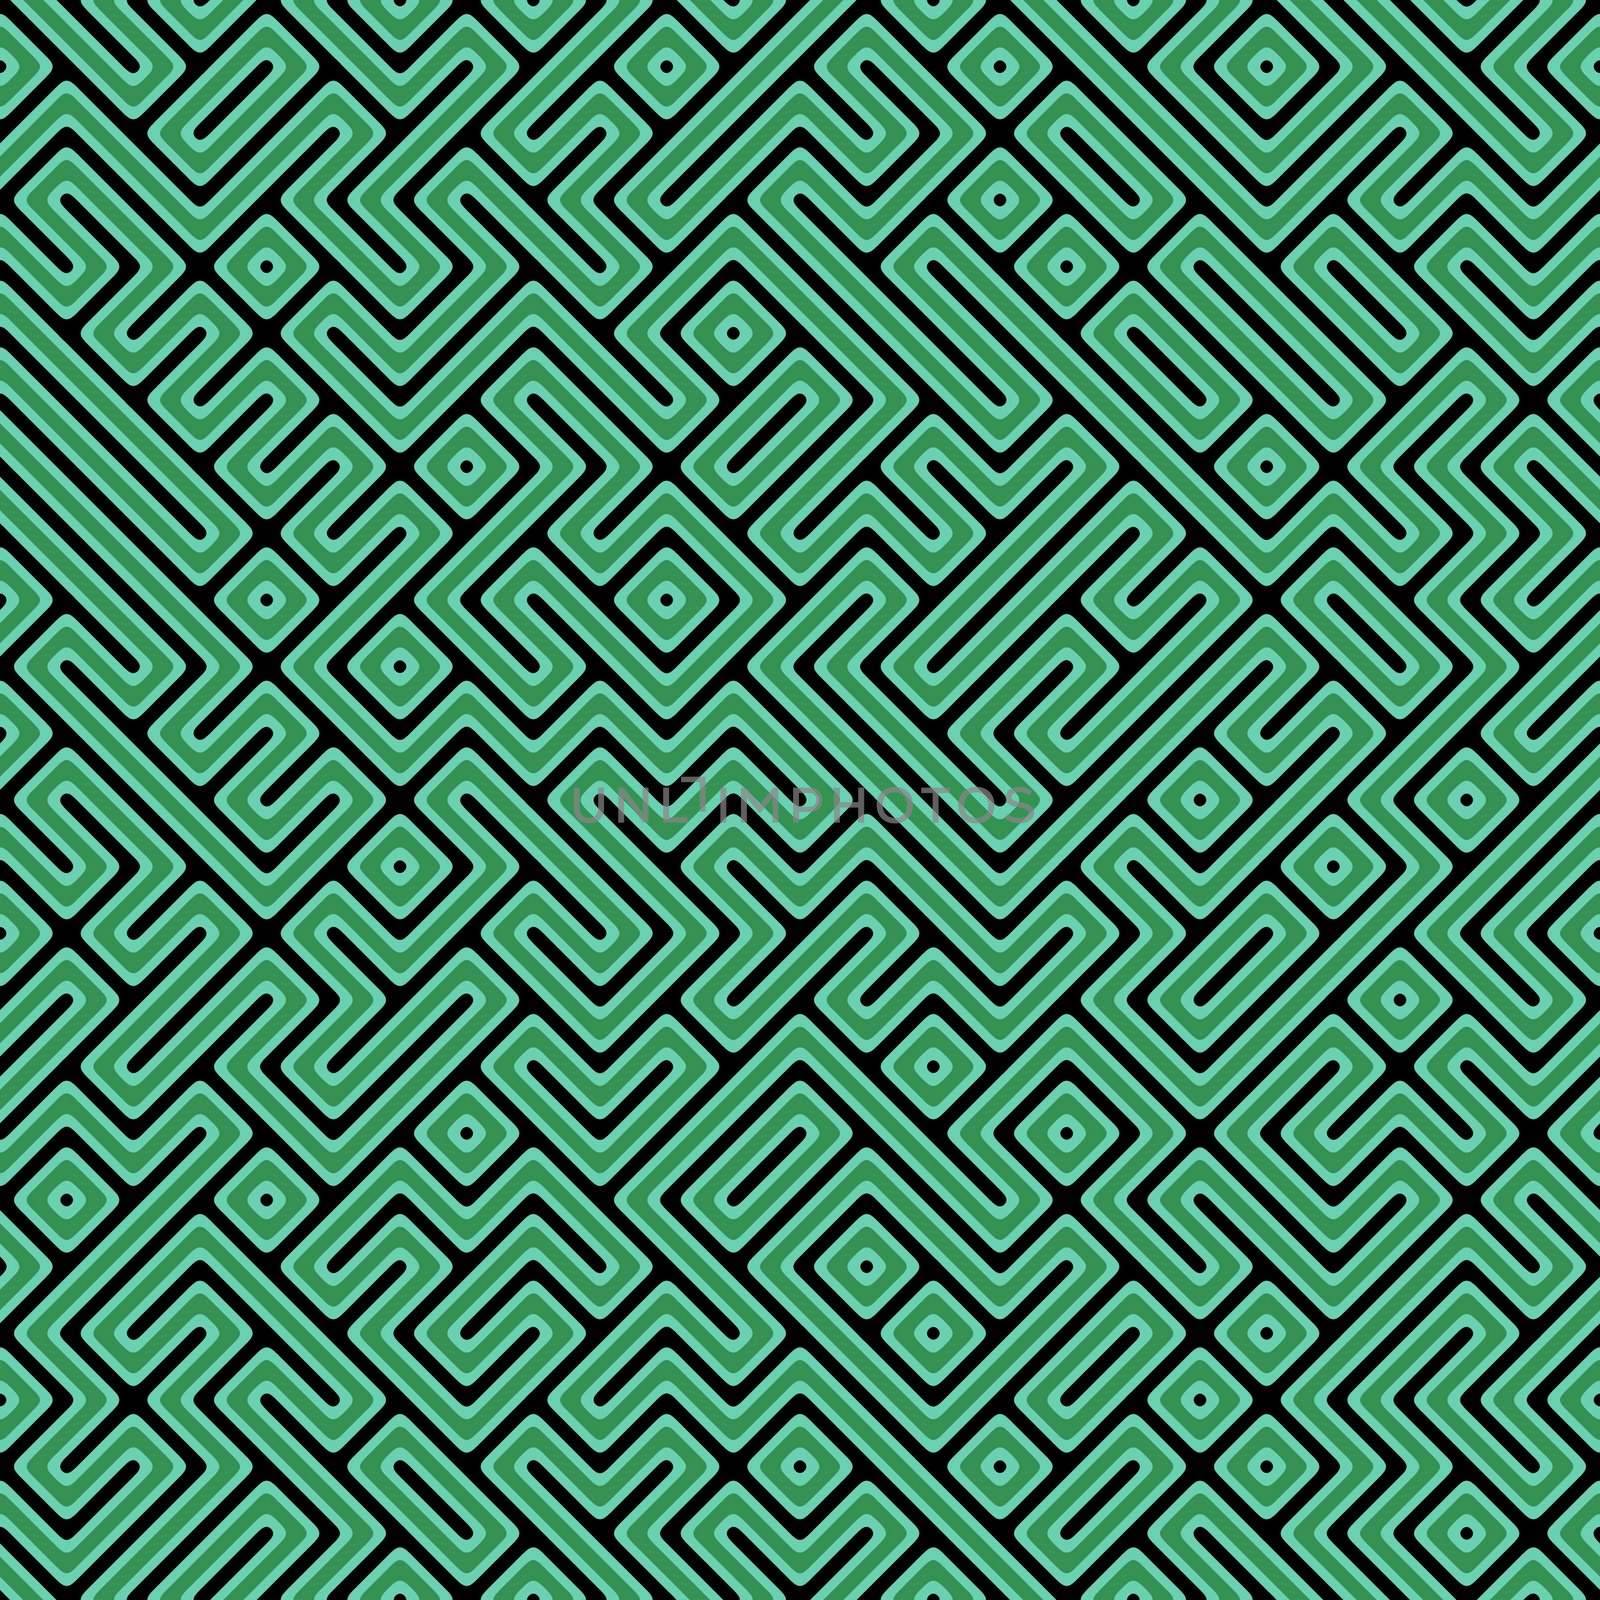 Endless Maze Continous Background Does Not End